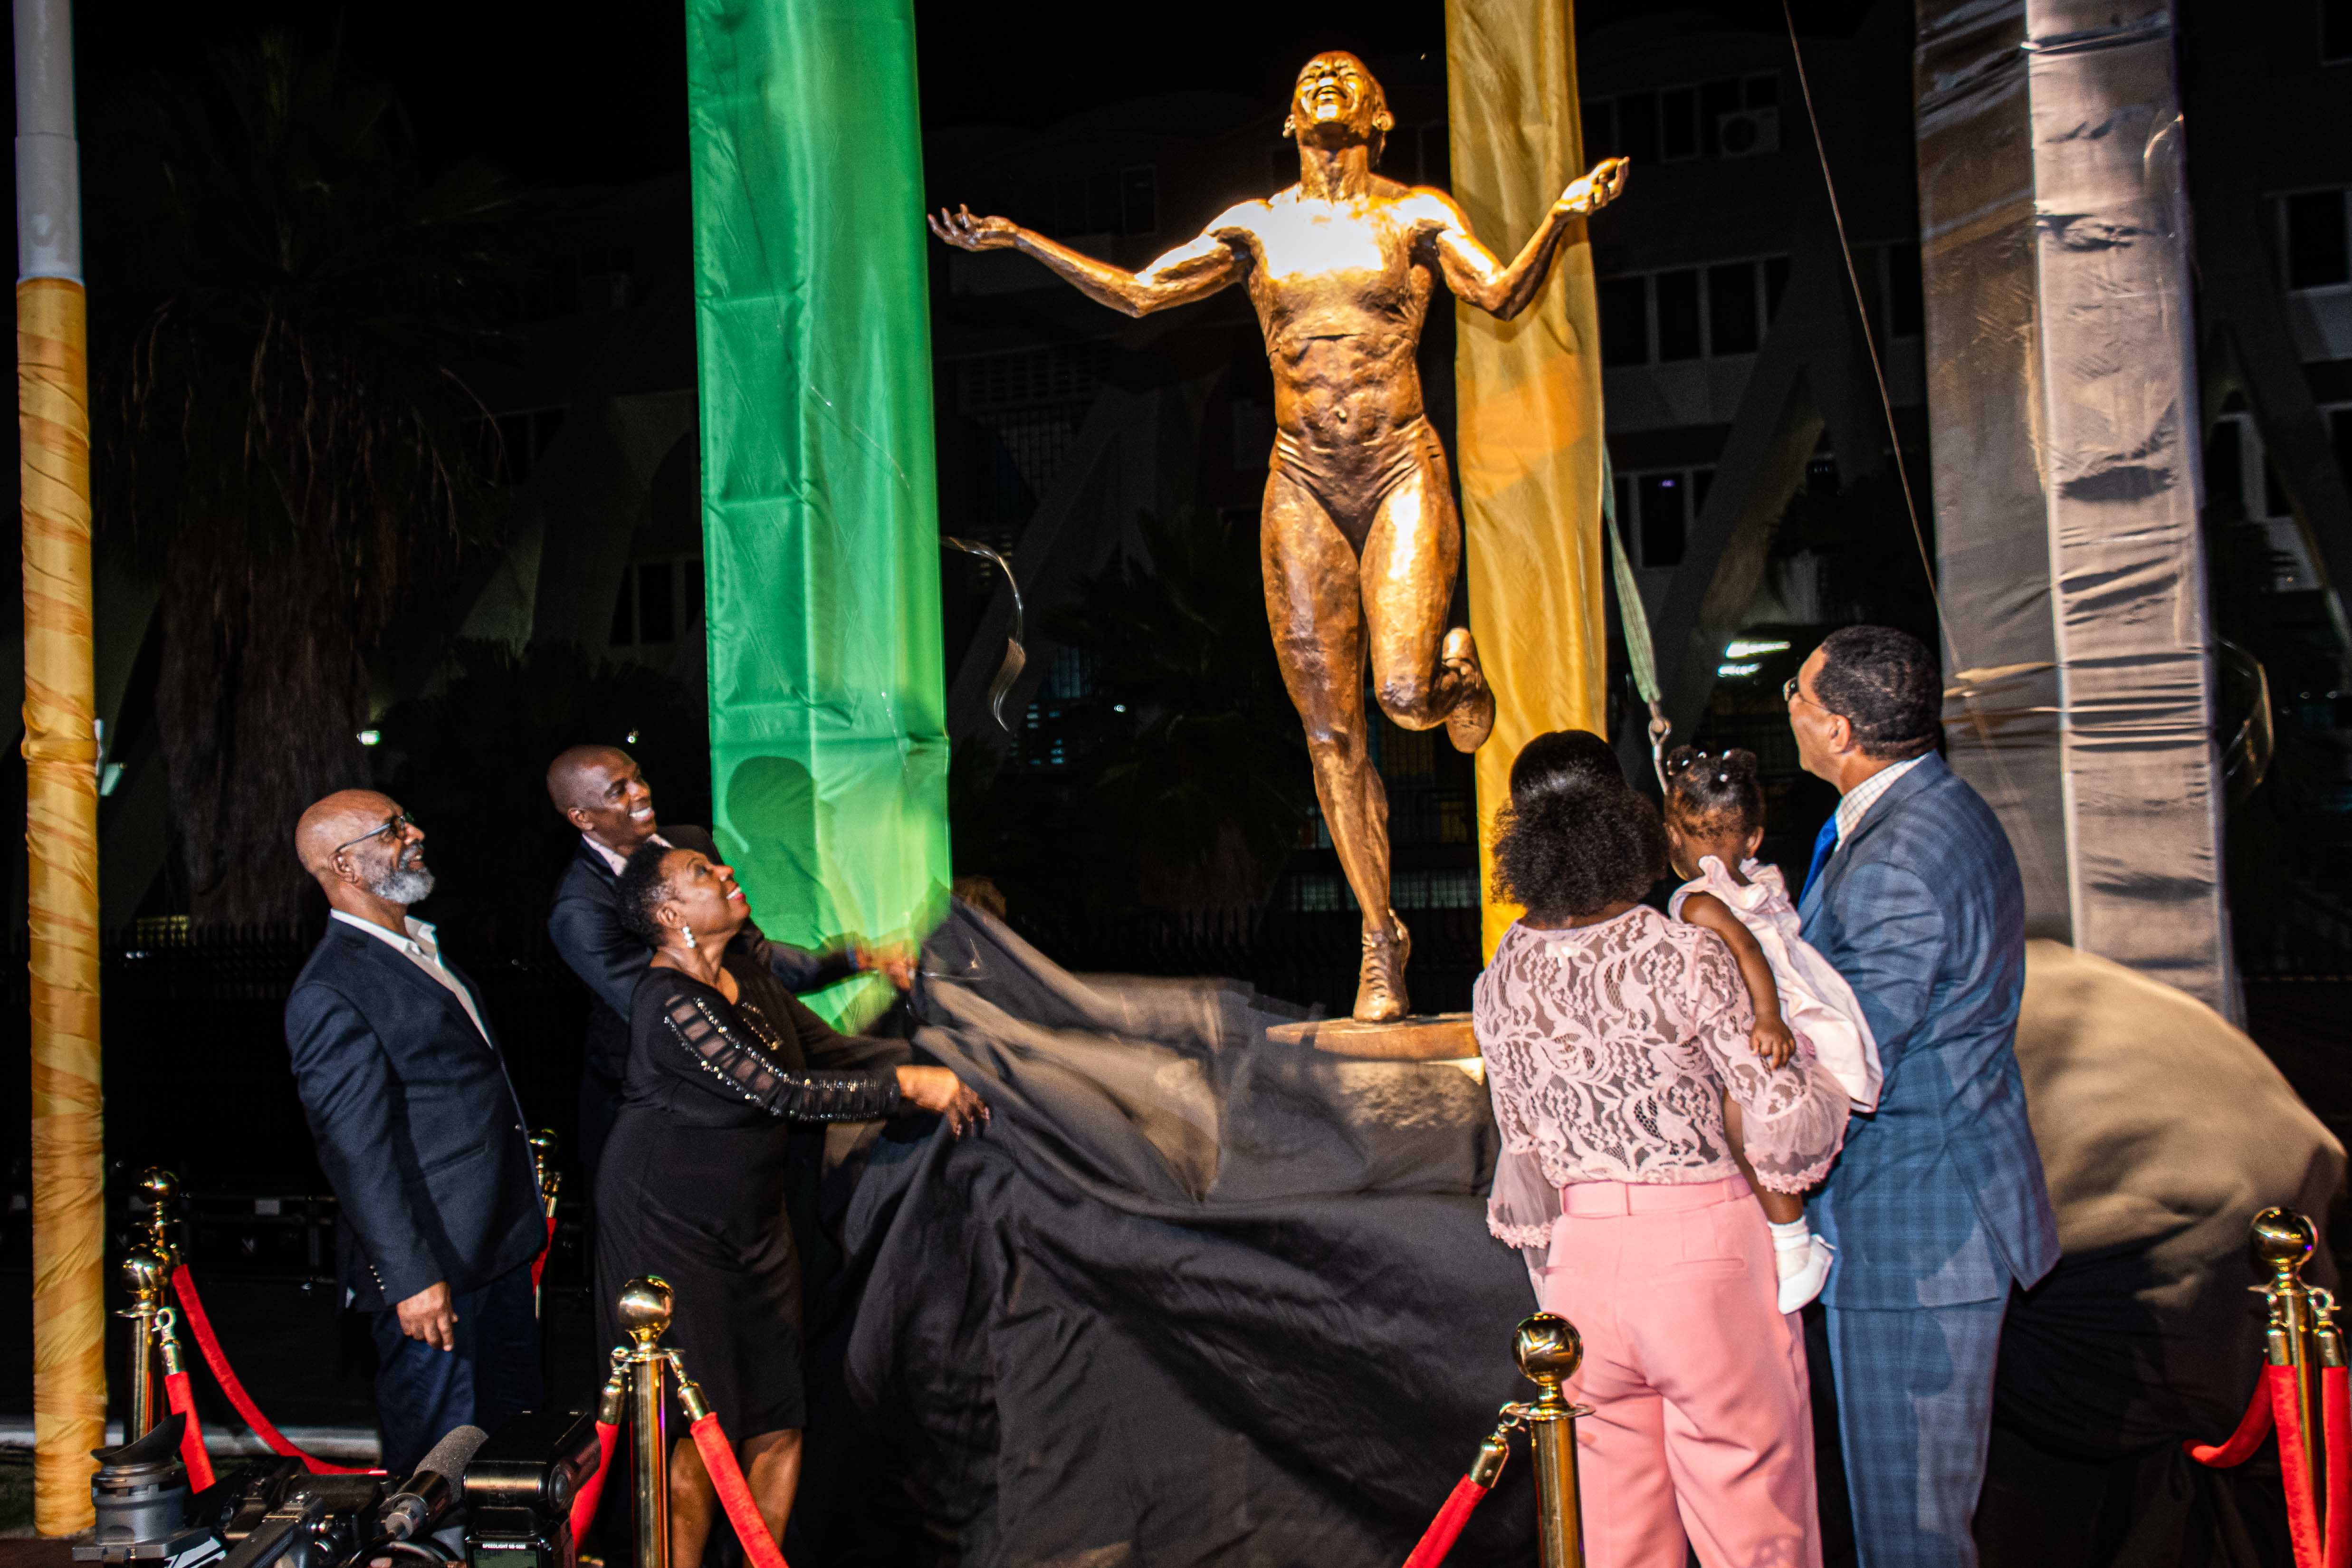 Veronica Campbell-Brown 'humbled' by statue unveiled in her honour